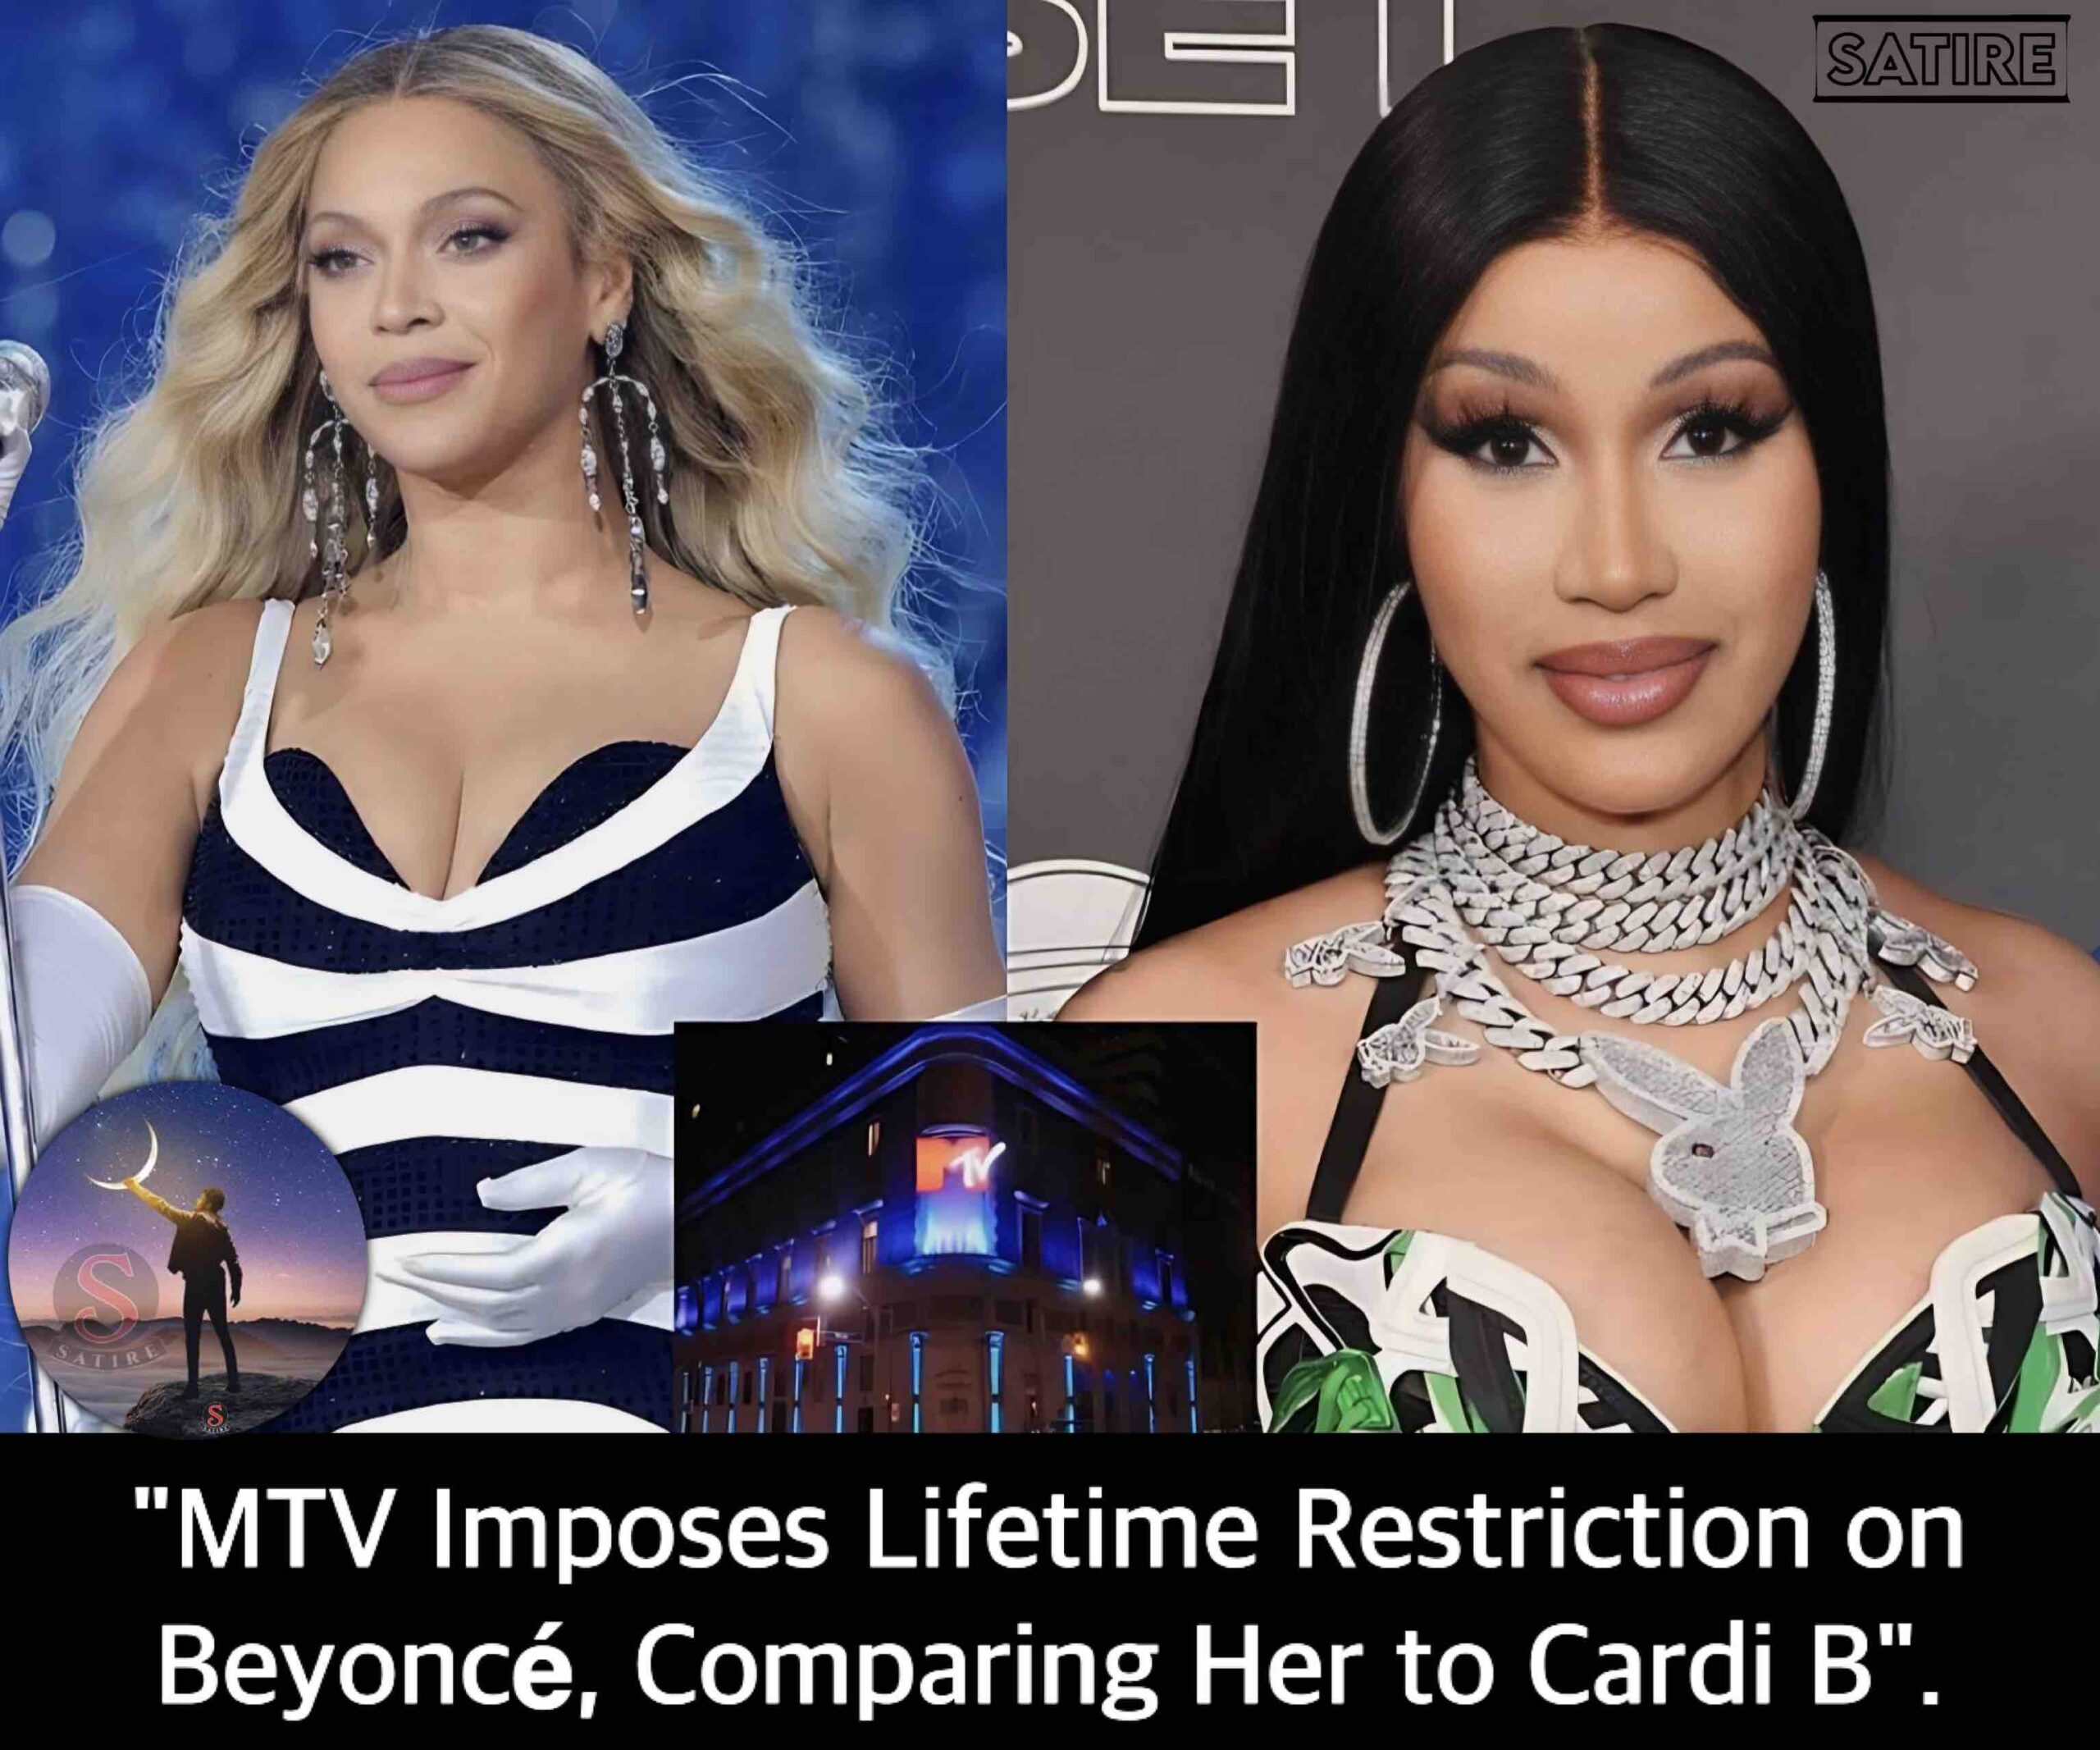 “MTV Imposes Lifetime Restriction on Beyoncé, Comparing Her to Cardi B”.